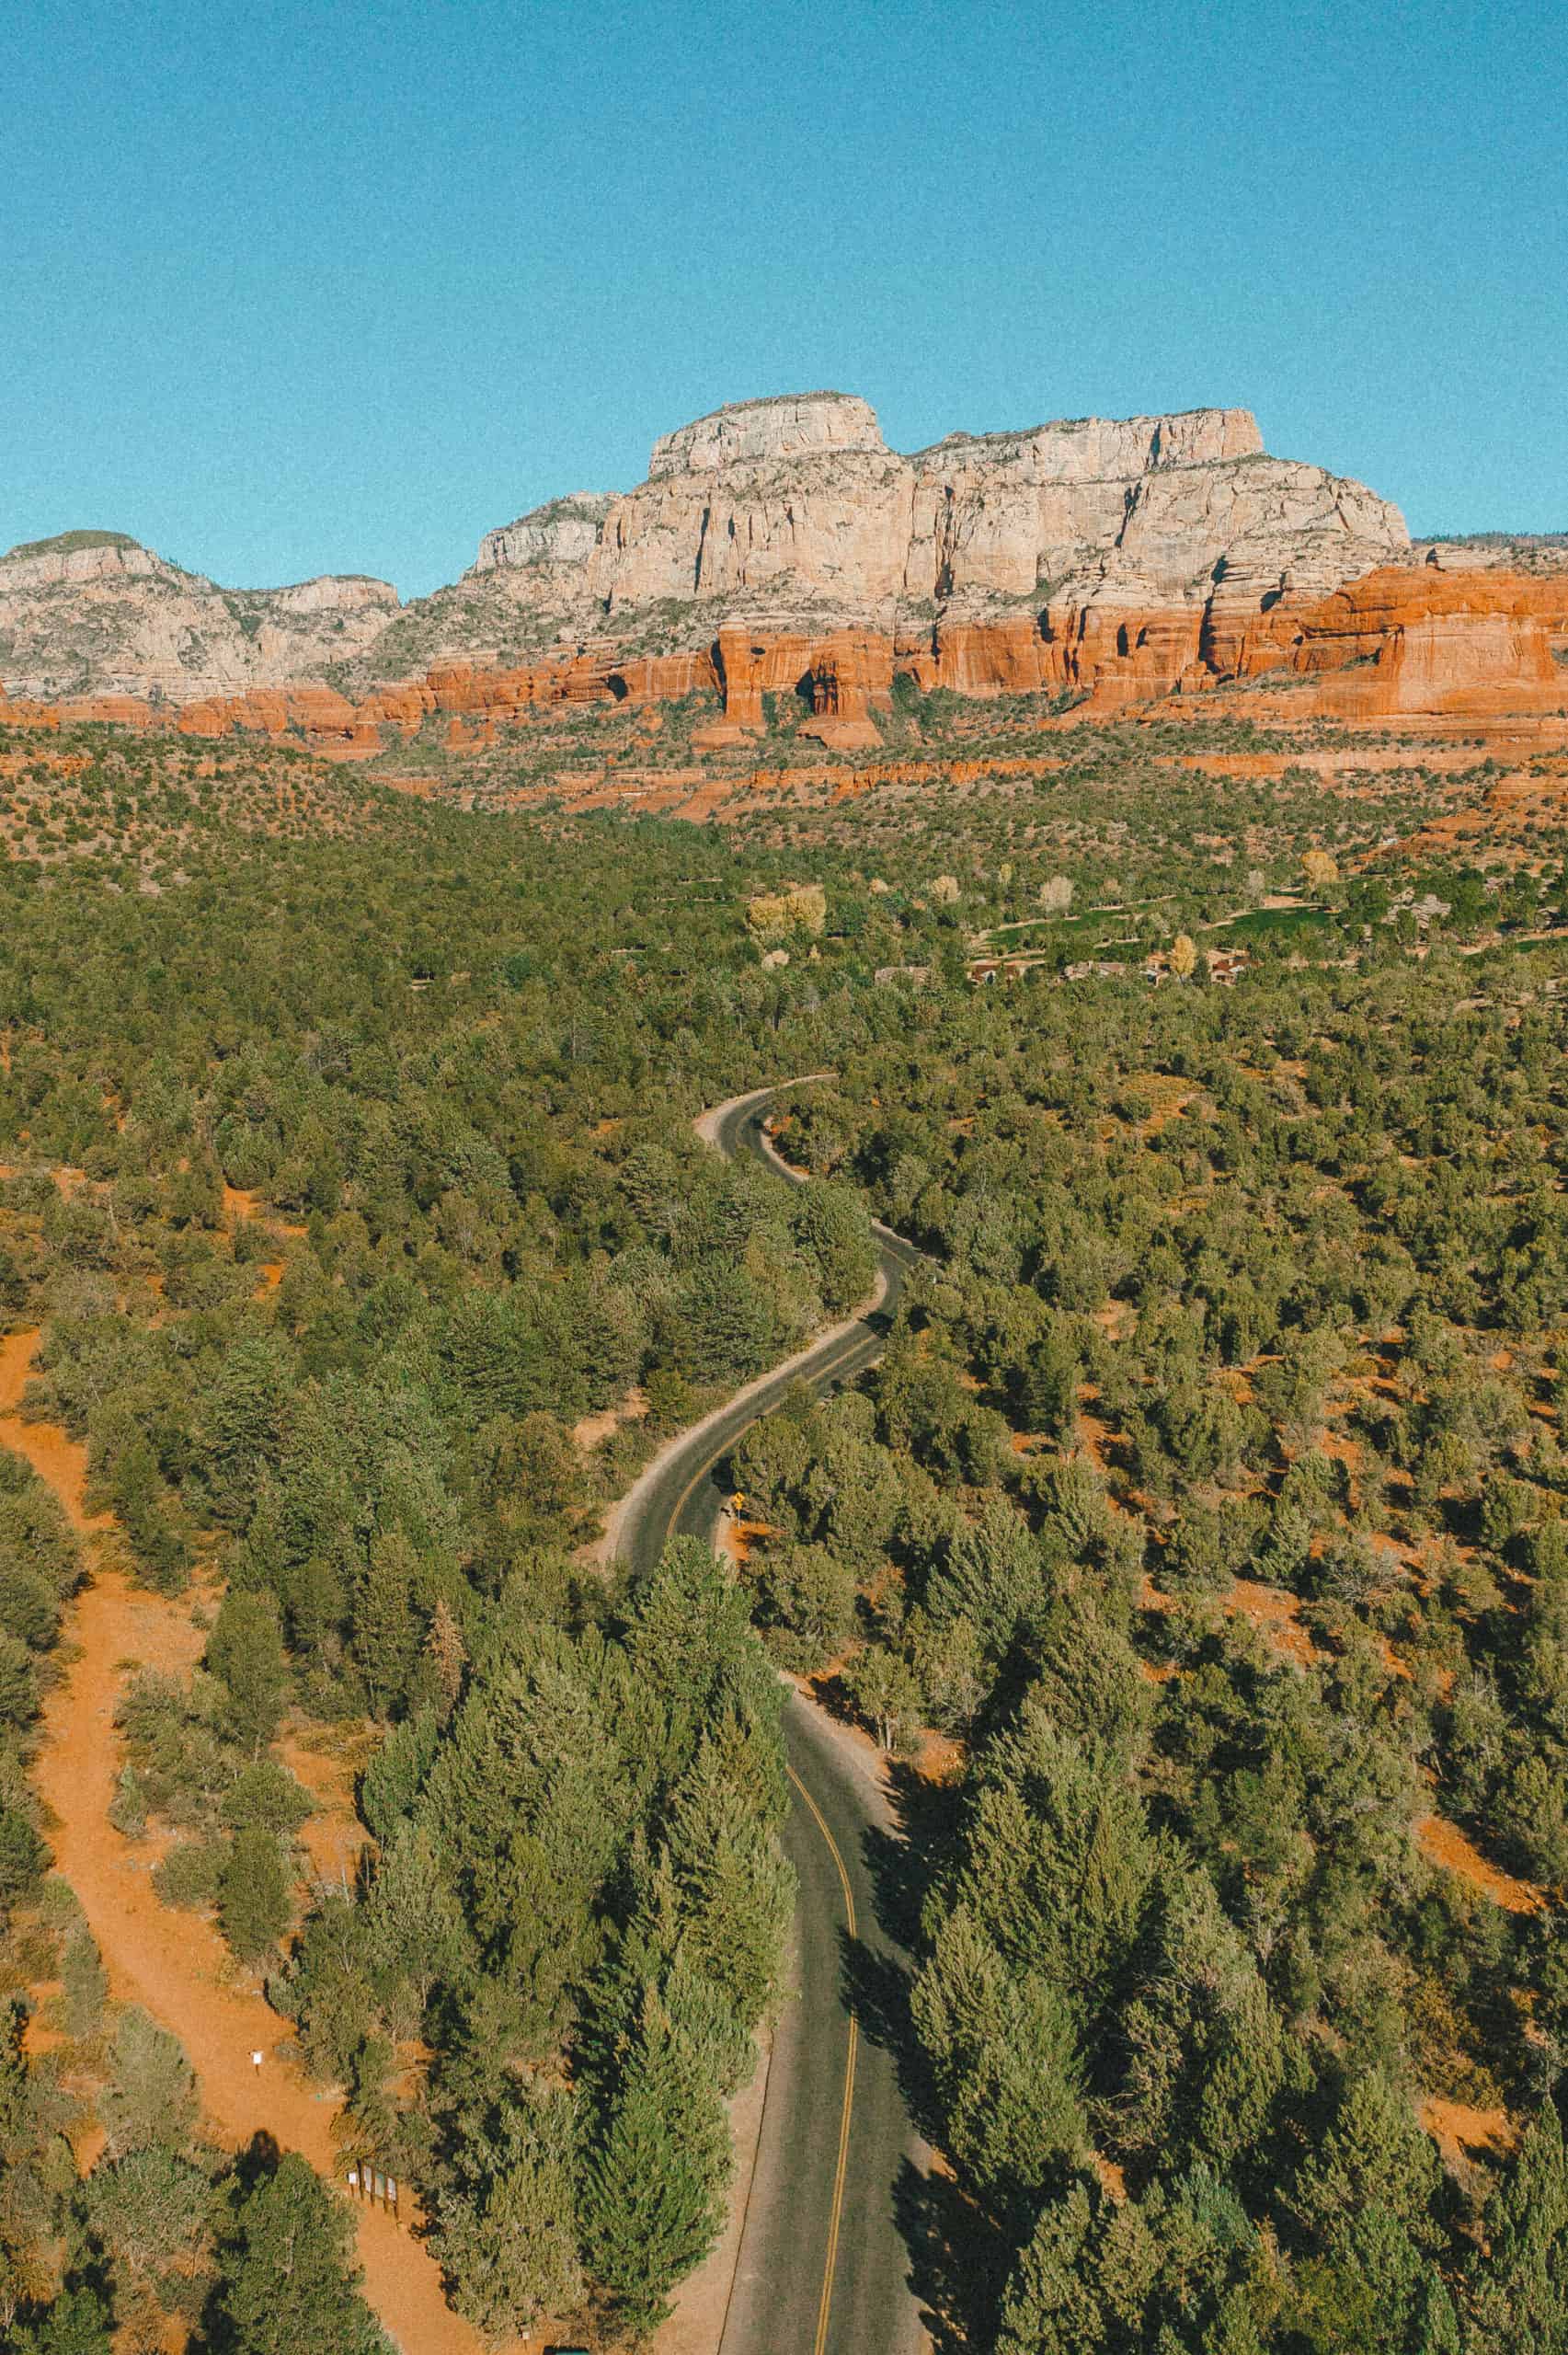 Red rock views and winding road in Sedona, Arizona from above (as seen by drone)